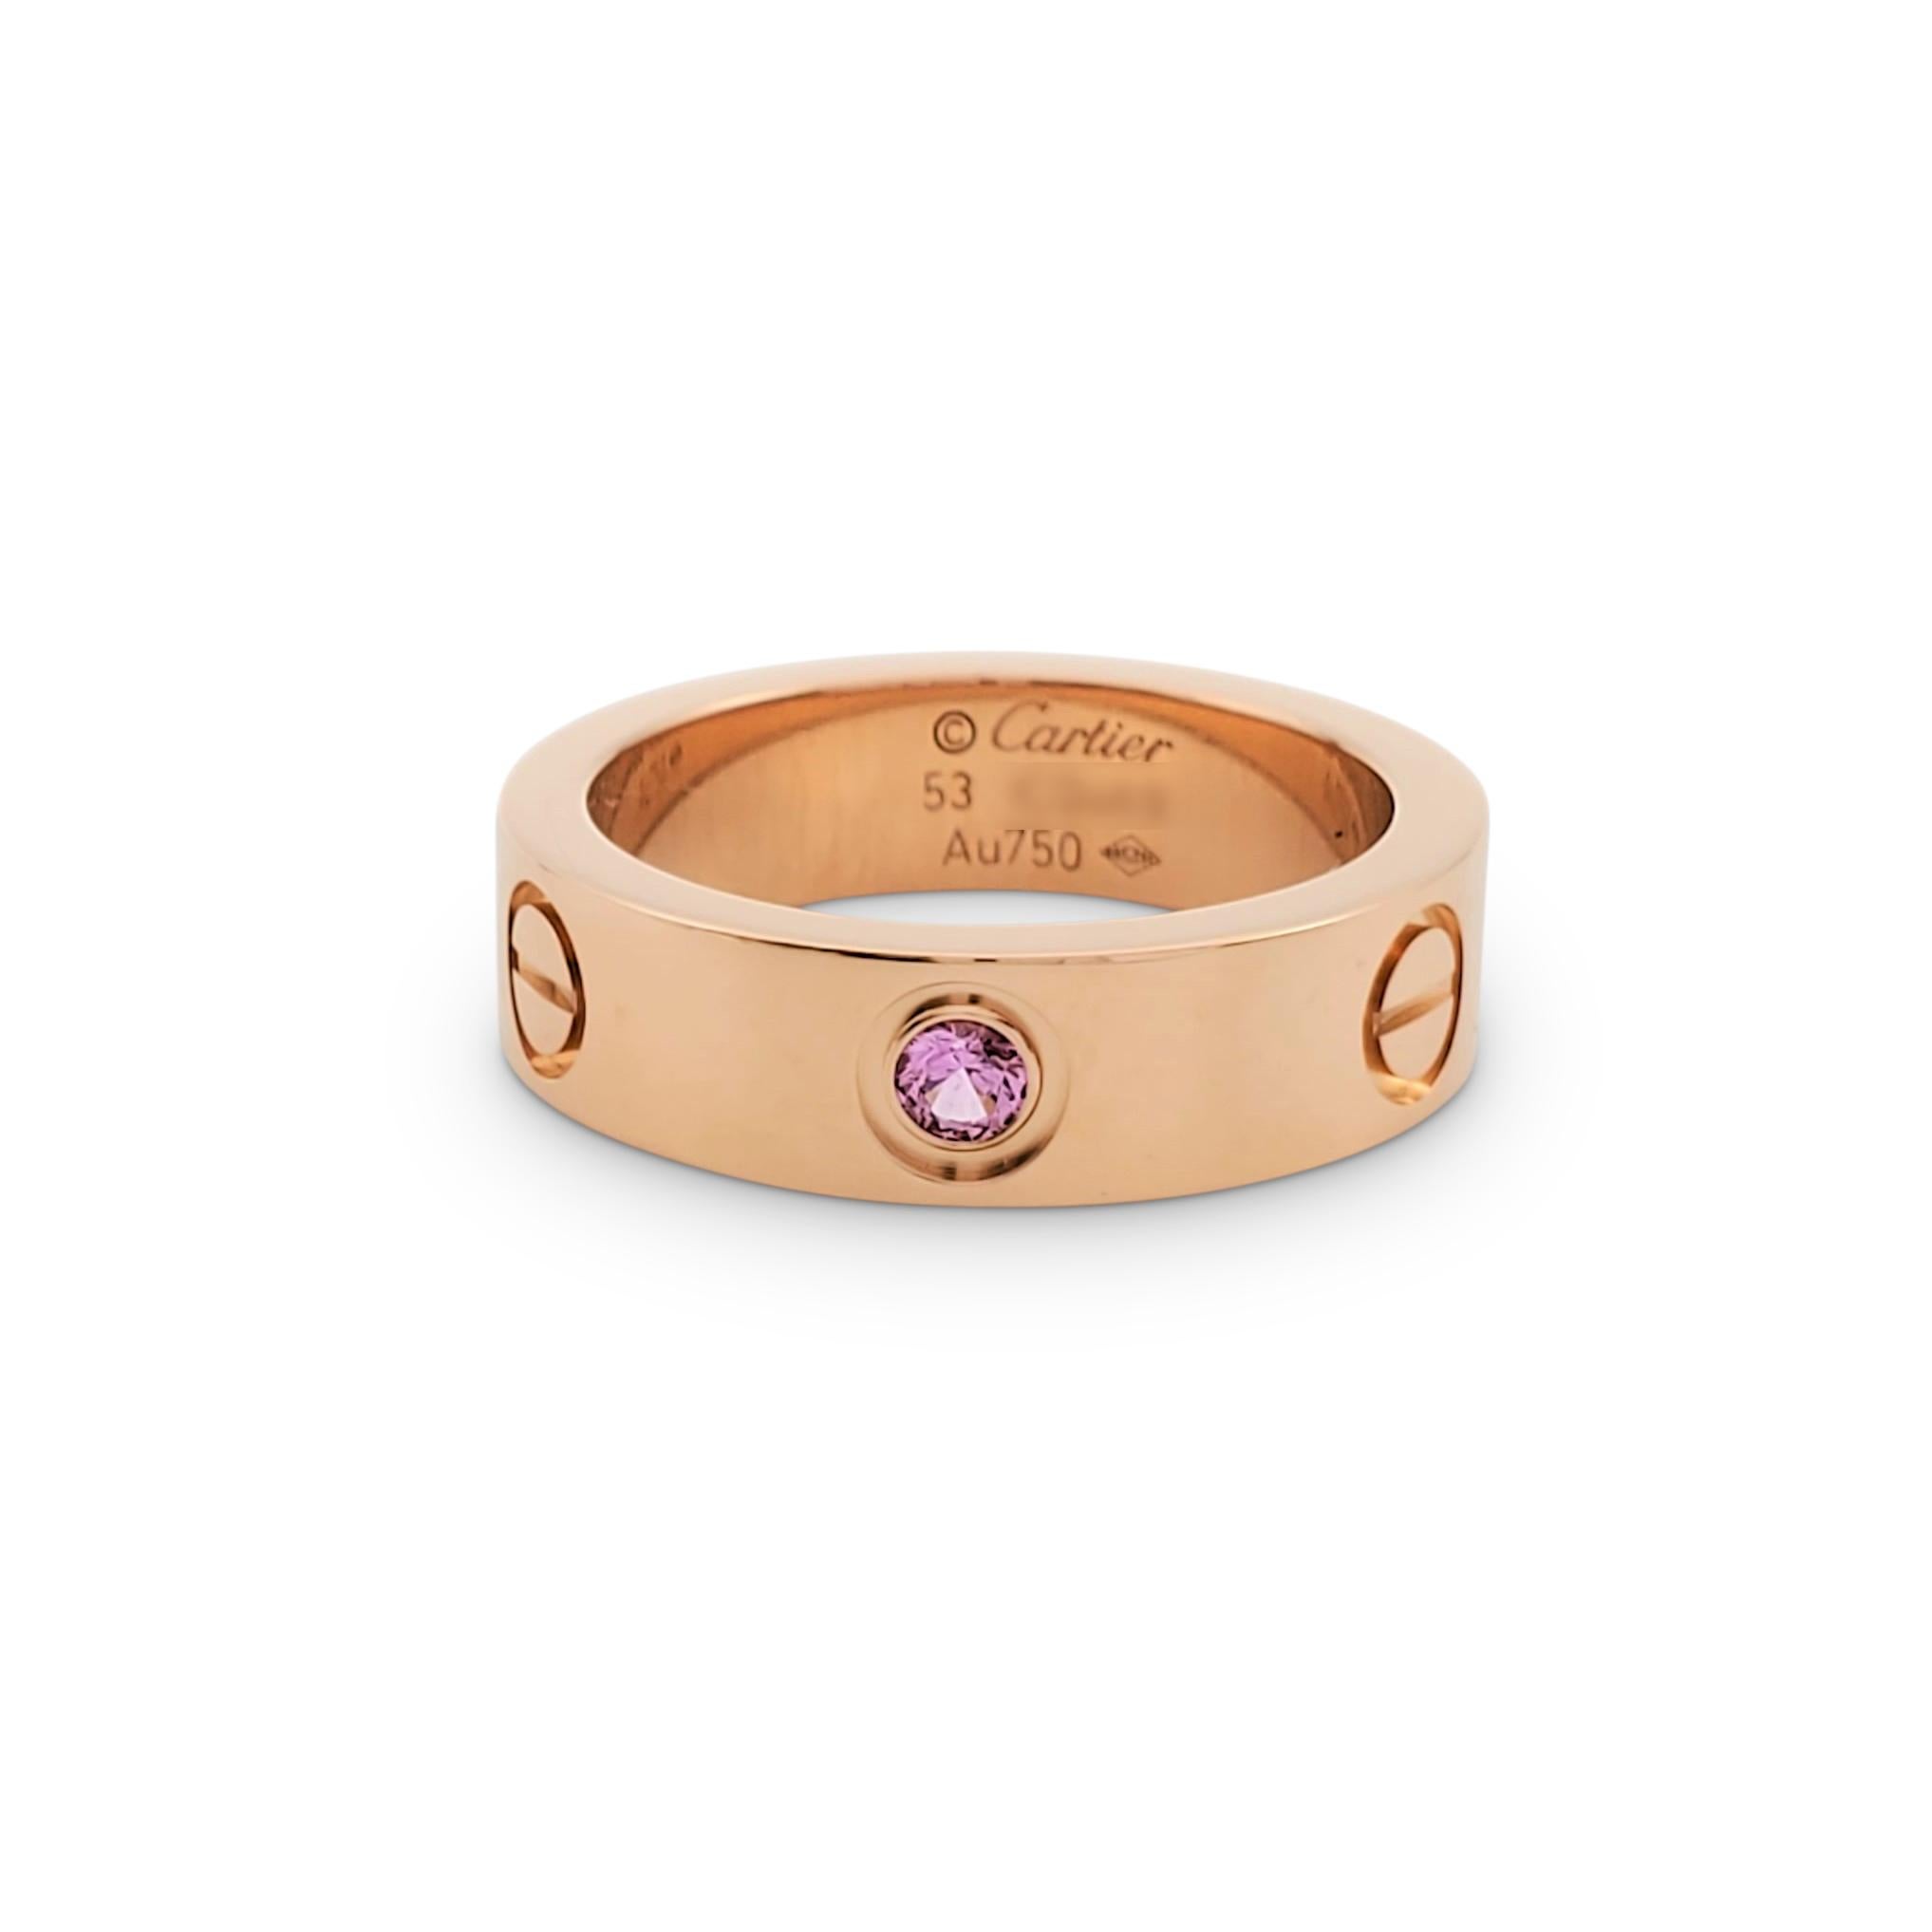 Authentic Cartier 'Love' ring crafted in 18 karat rose gold and set with one round pink sapphire weighing an estimated 0.06 carats. Signed Cartier, 53, Au750, with serial number. Ring size 53 (US 6 1/4). The ring is presented with the original box